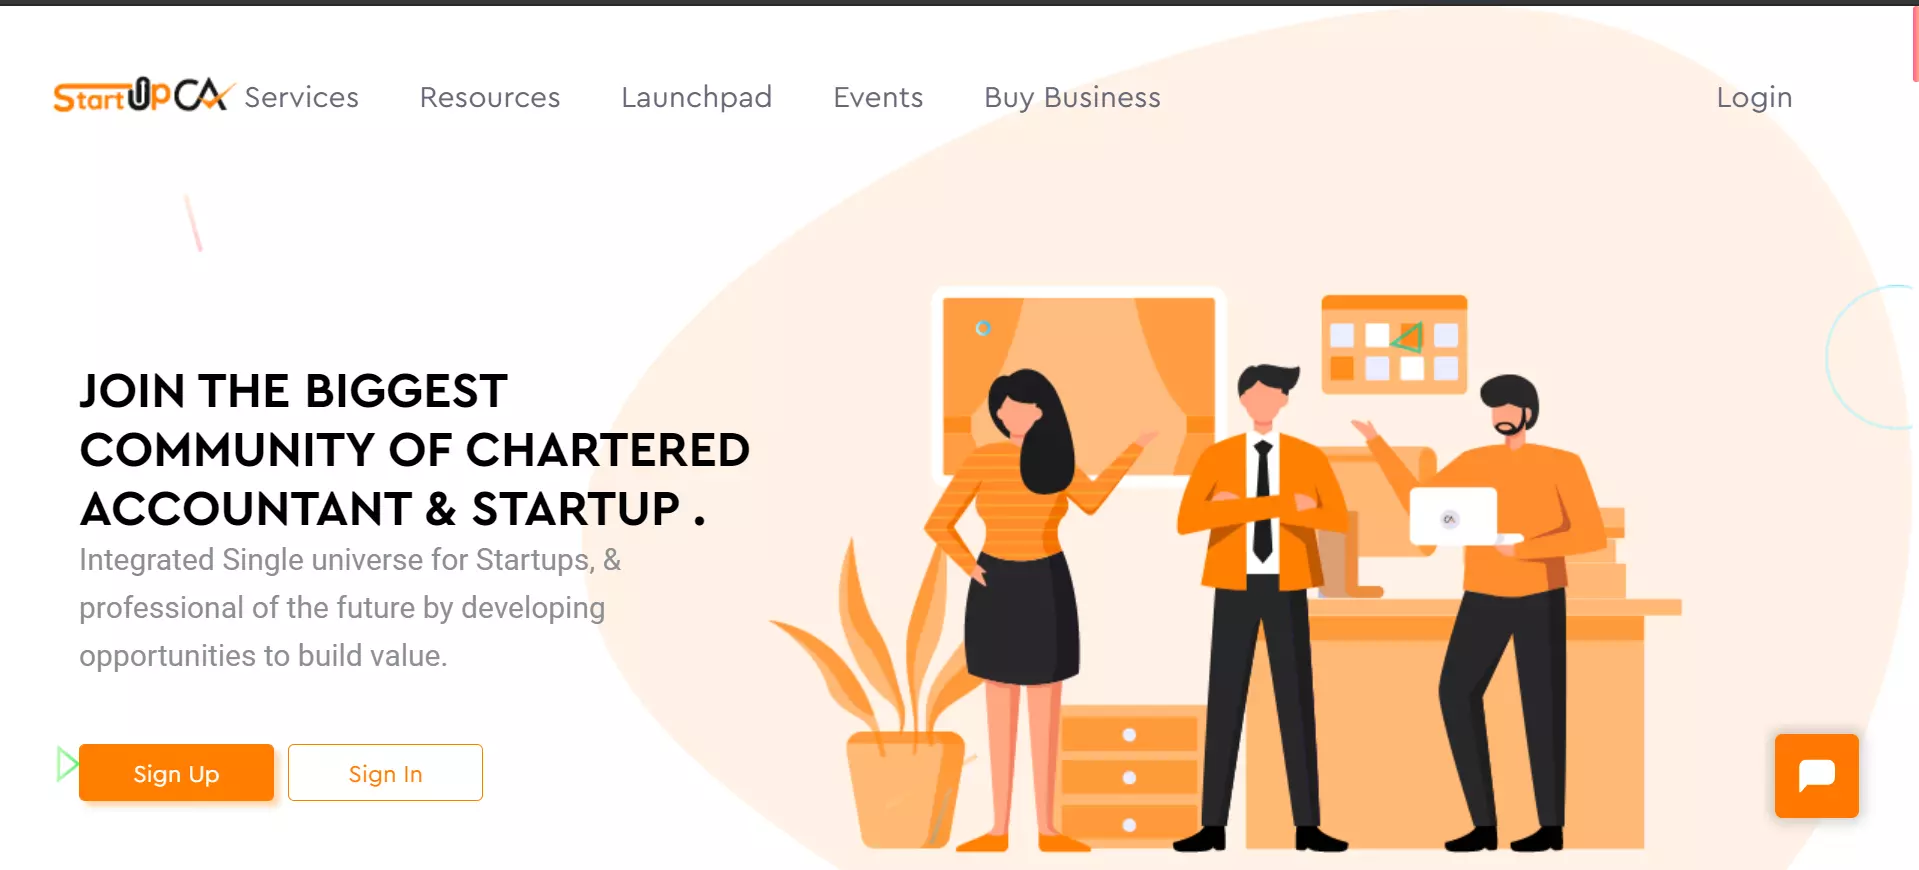 startupca project made by srchout software